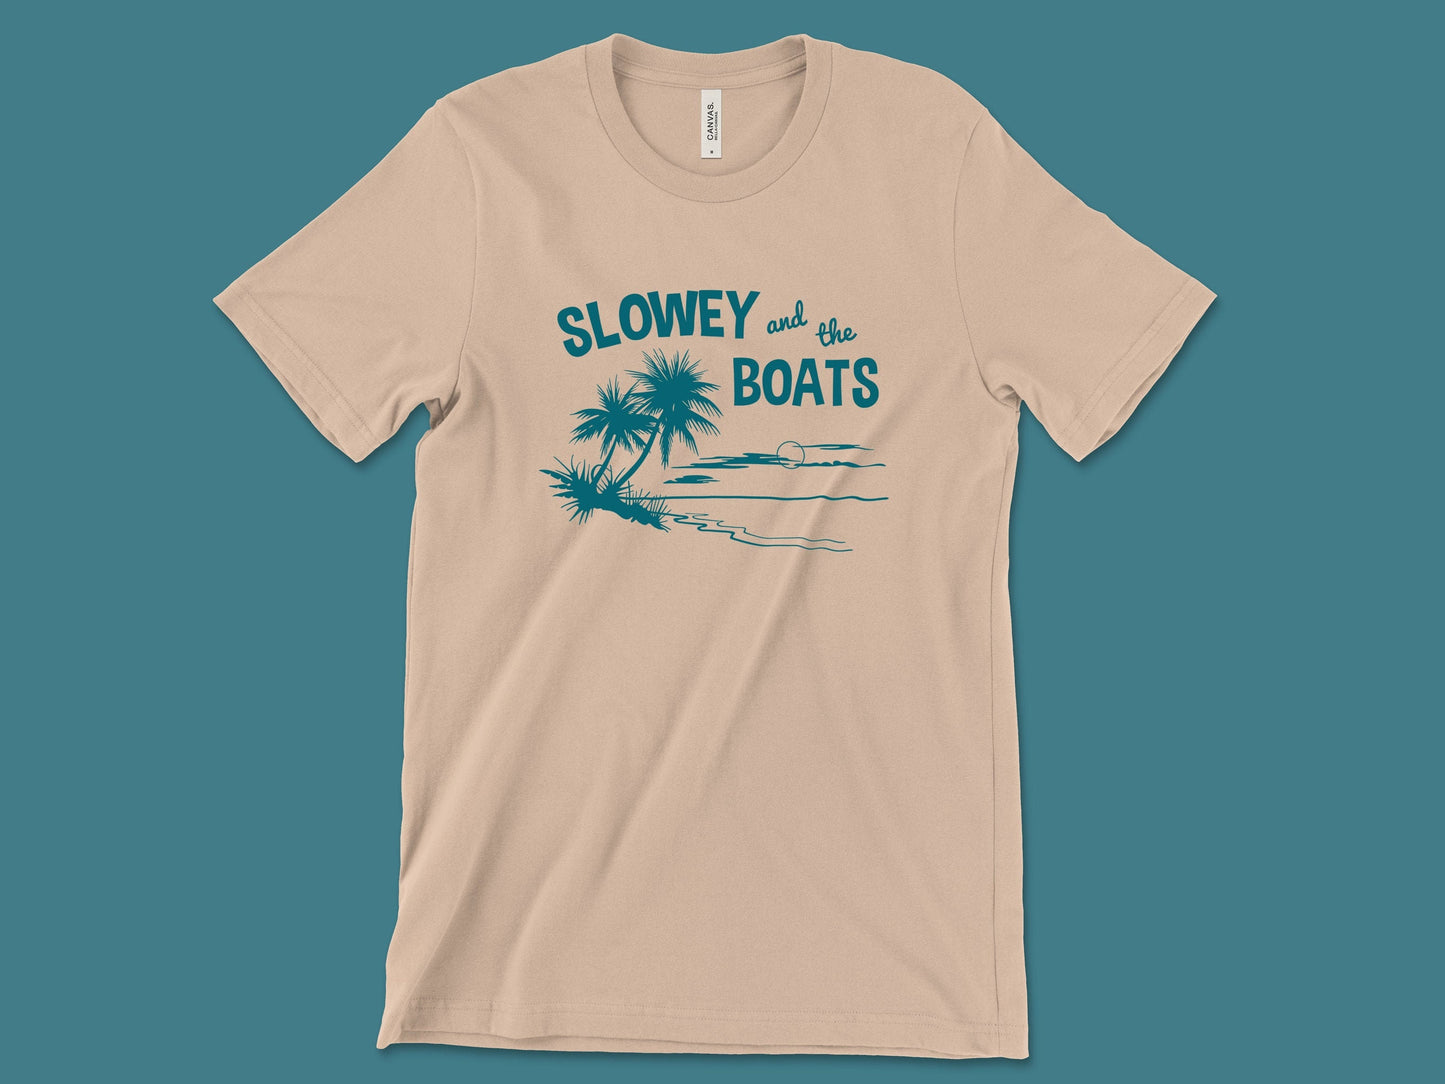 Slowey and The Boats "Sand Dune" T